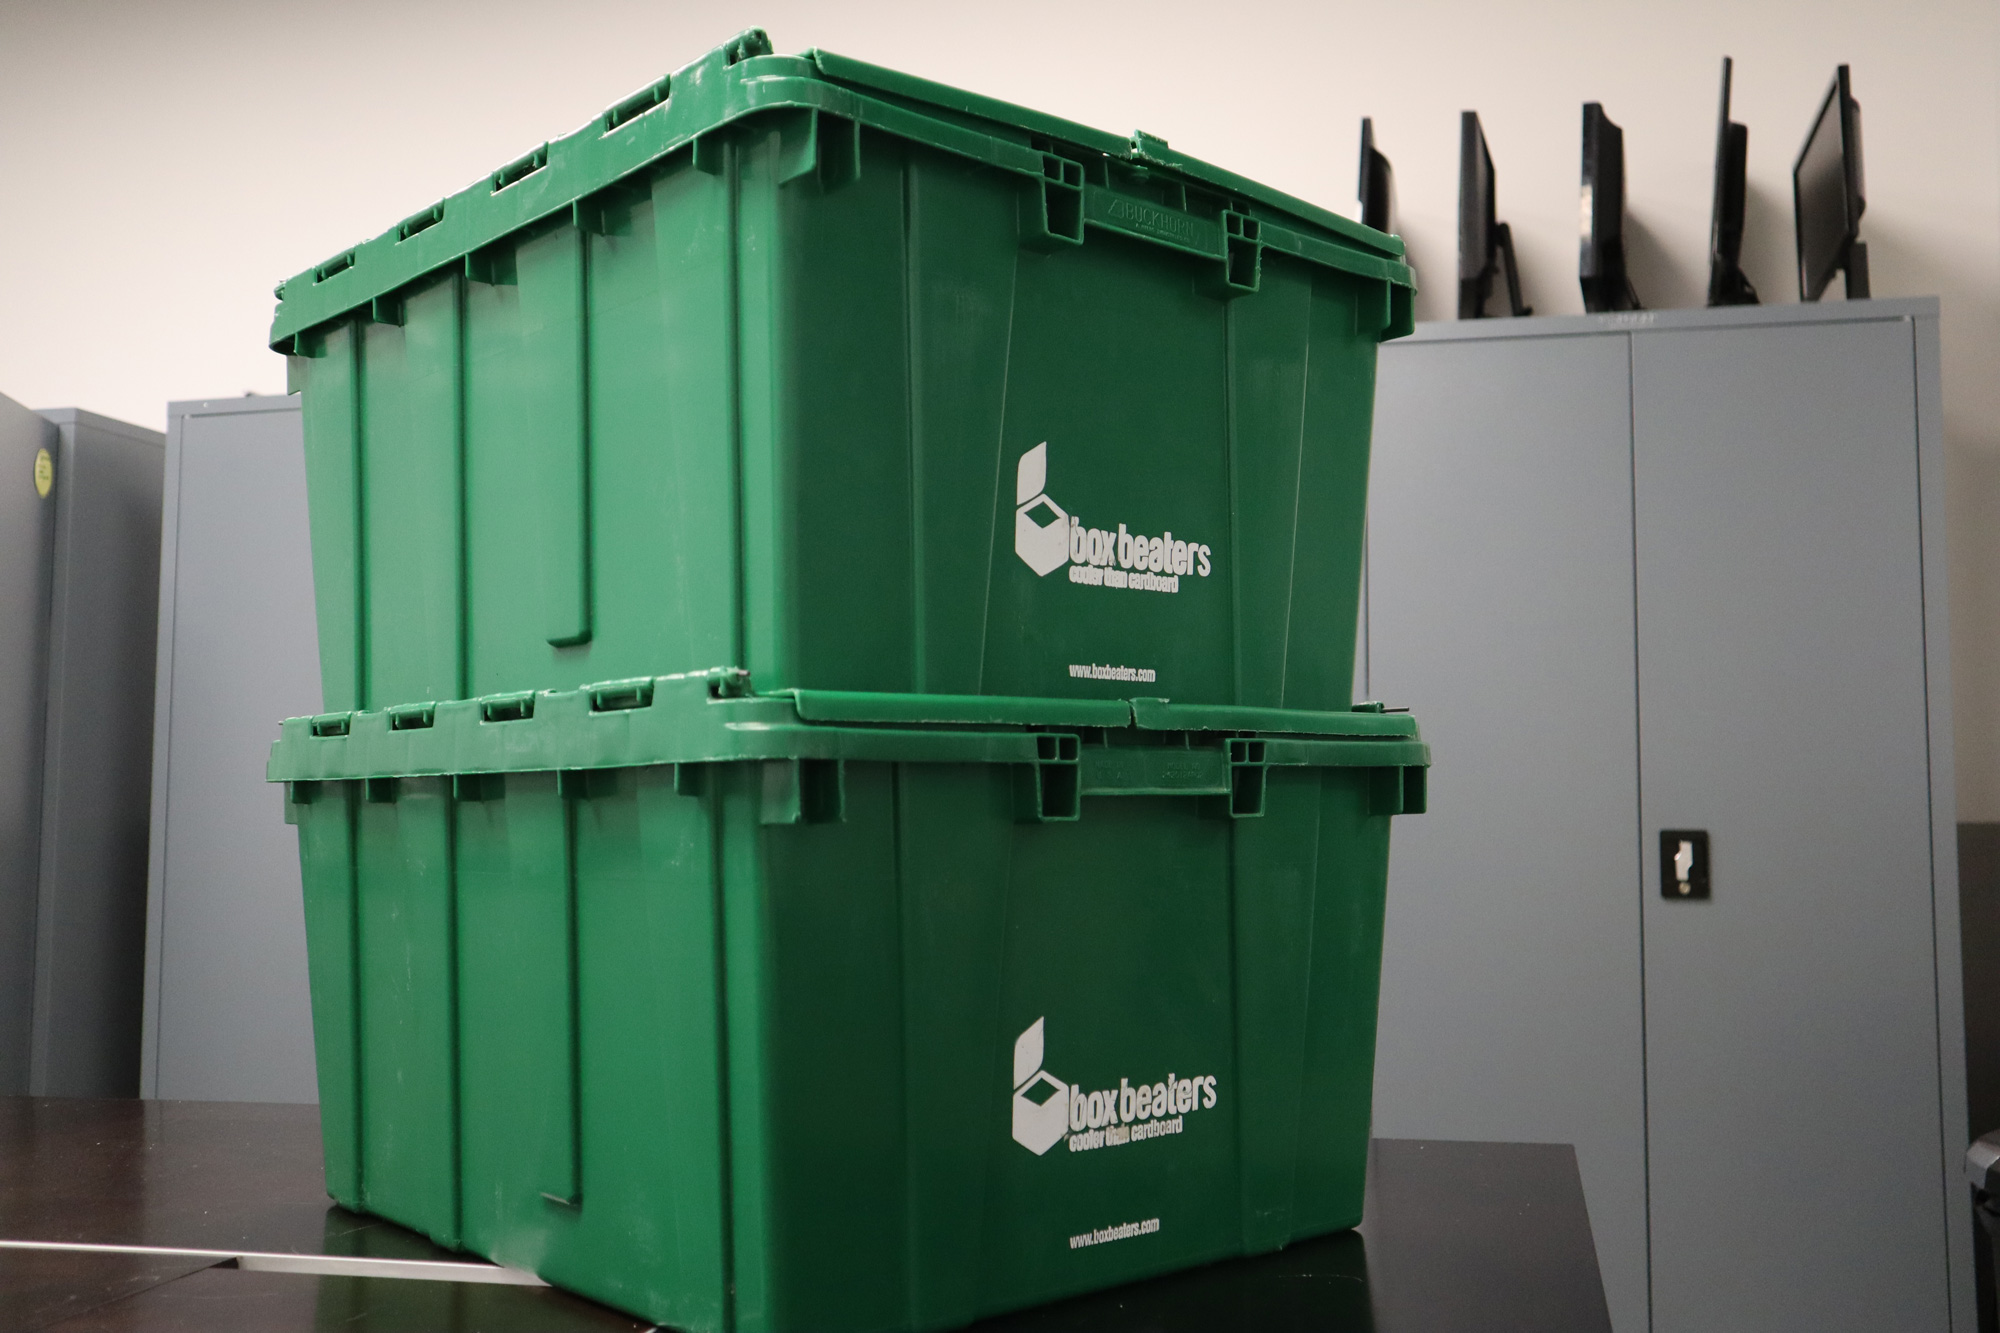 Two green bins stacked together in a conference room